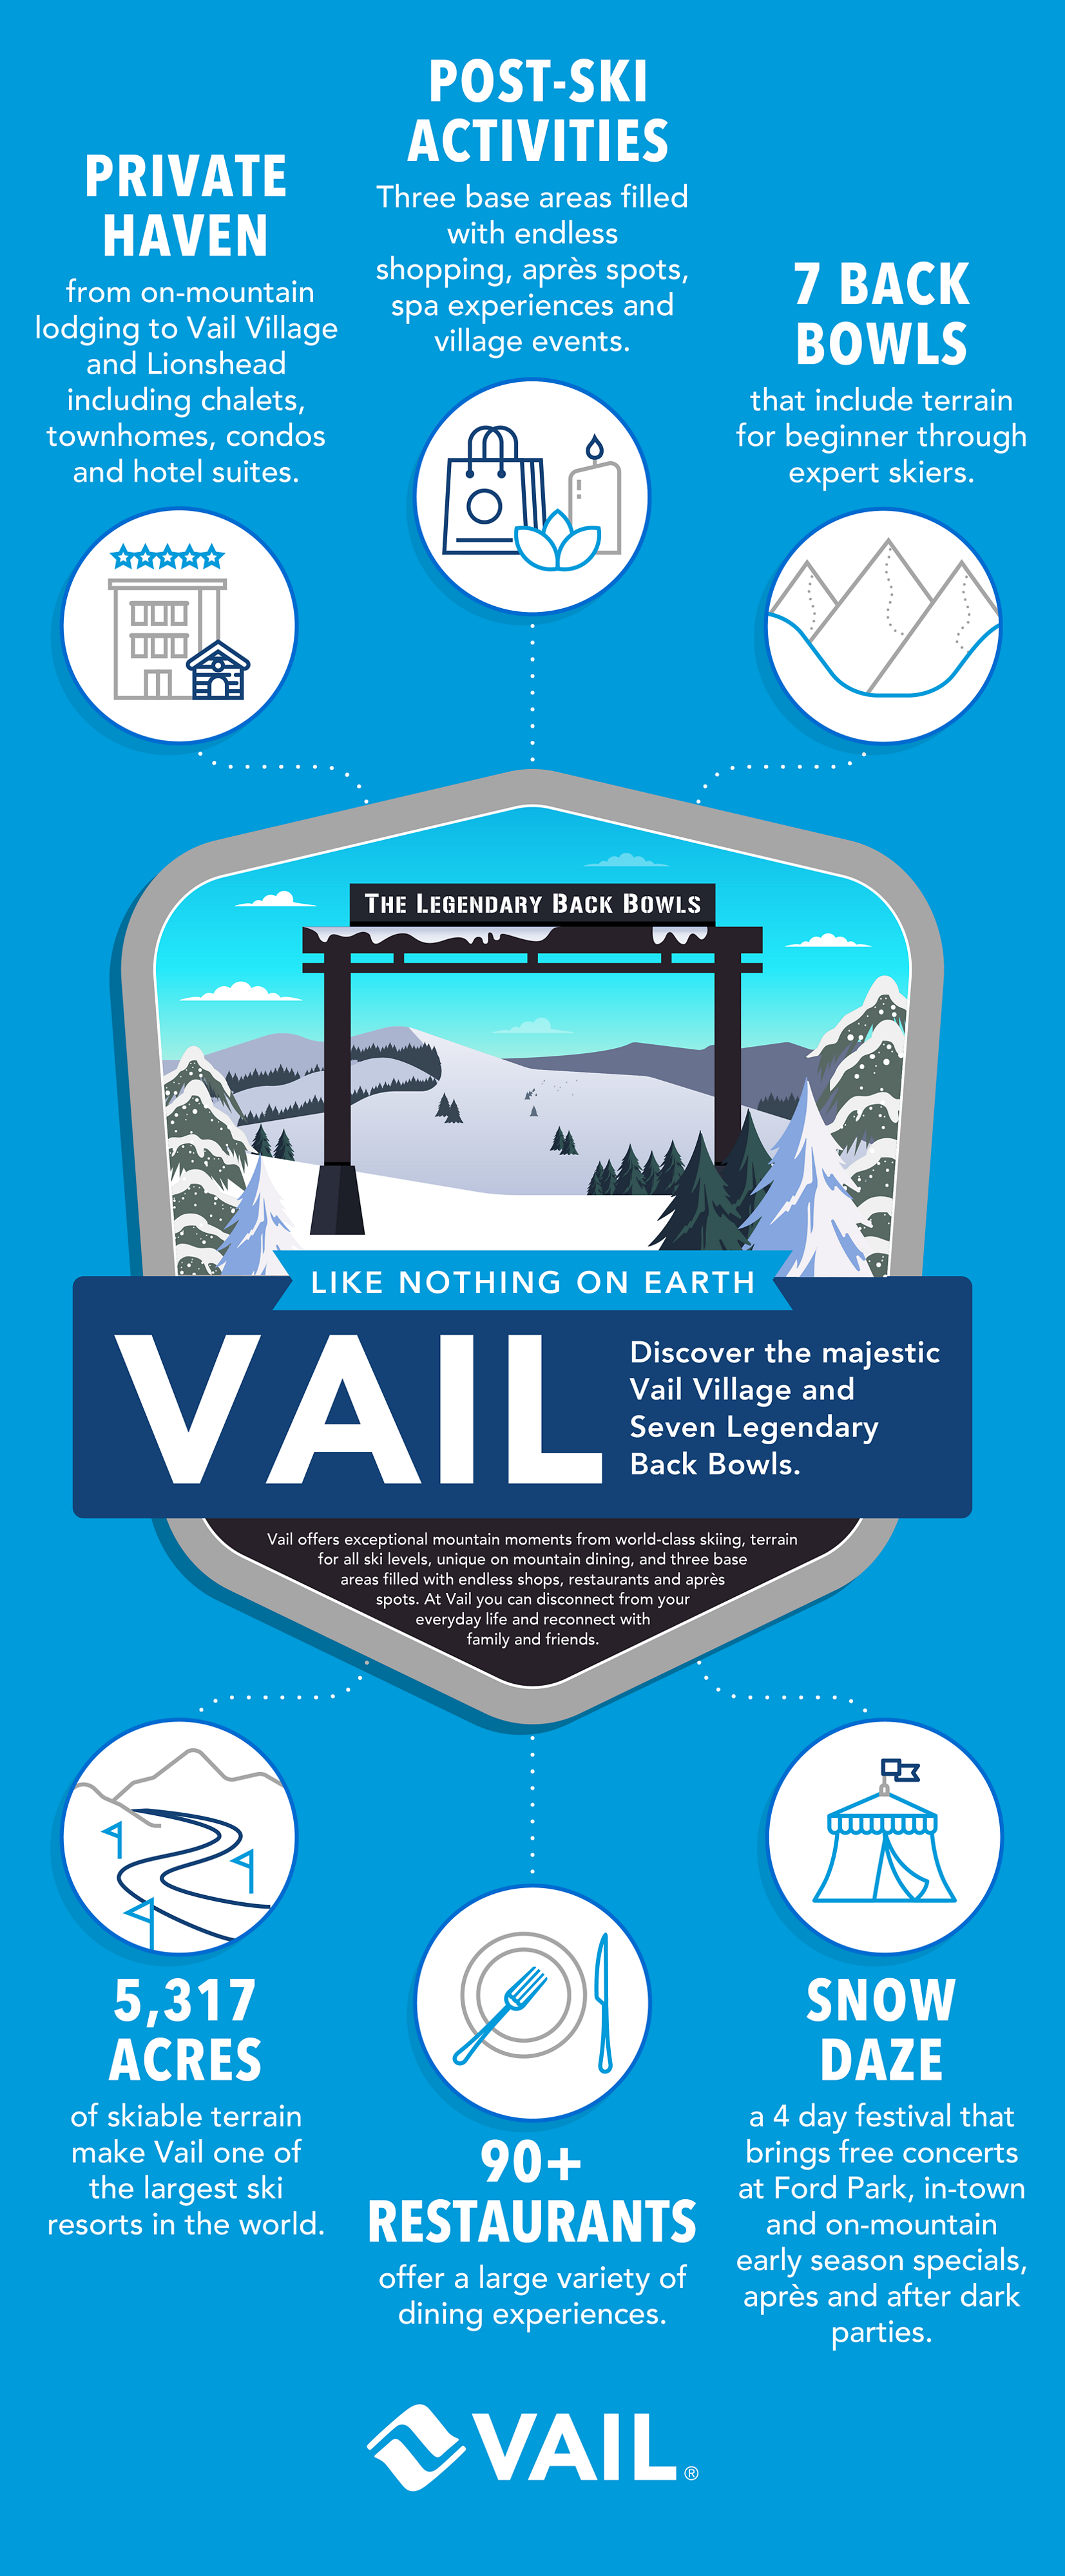 An infographic about Vail Resort inclduing stats like: 7 back bowls, 90 + restaurants, and 5,317 acres of skiable terrain. It also discusses Vail's apres activities, legacy days, and lodging options.